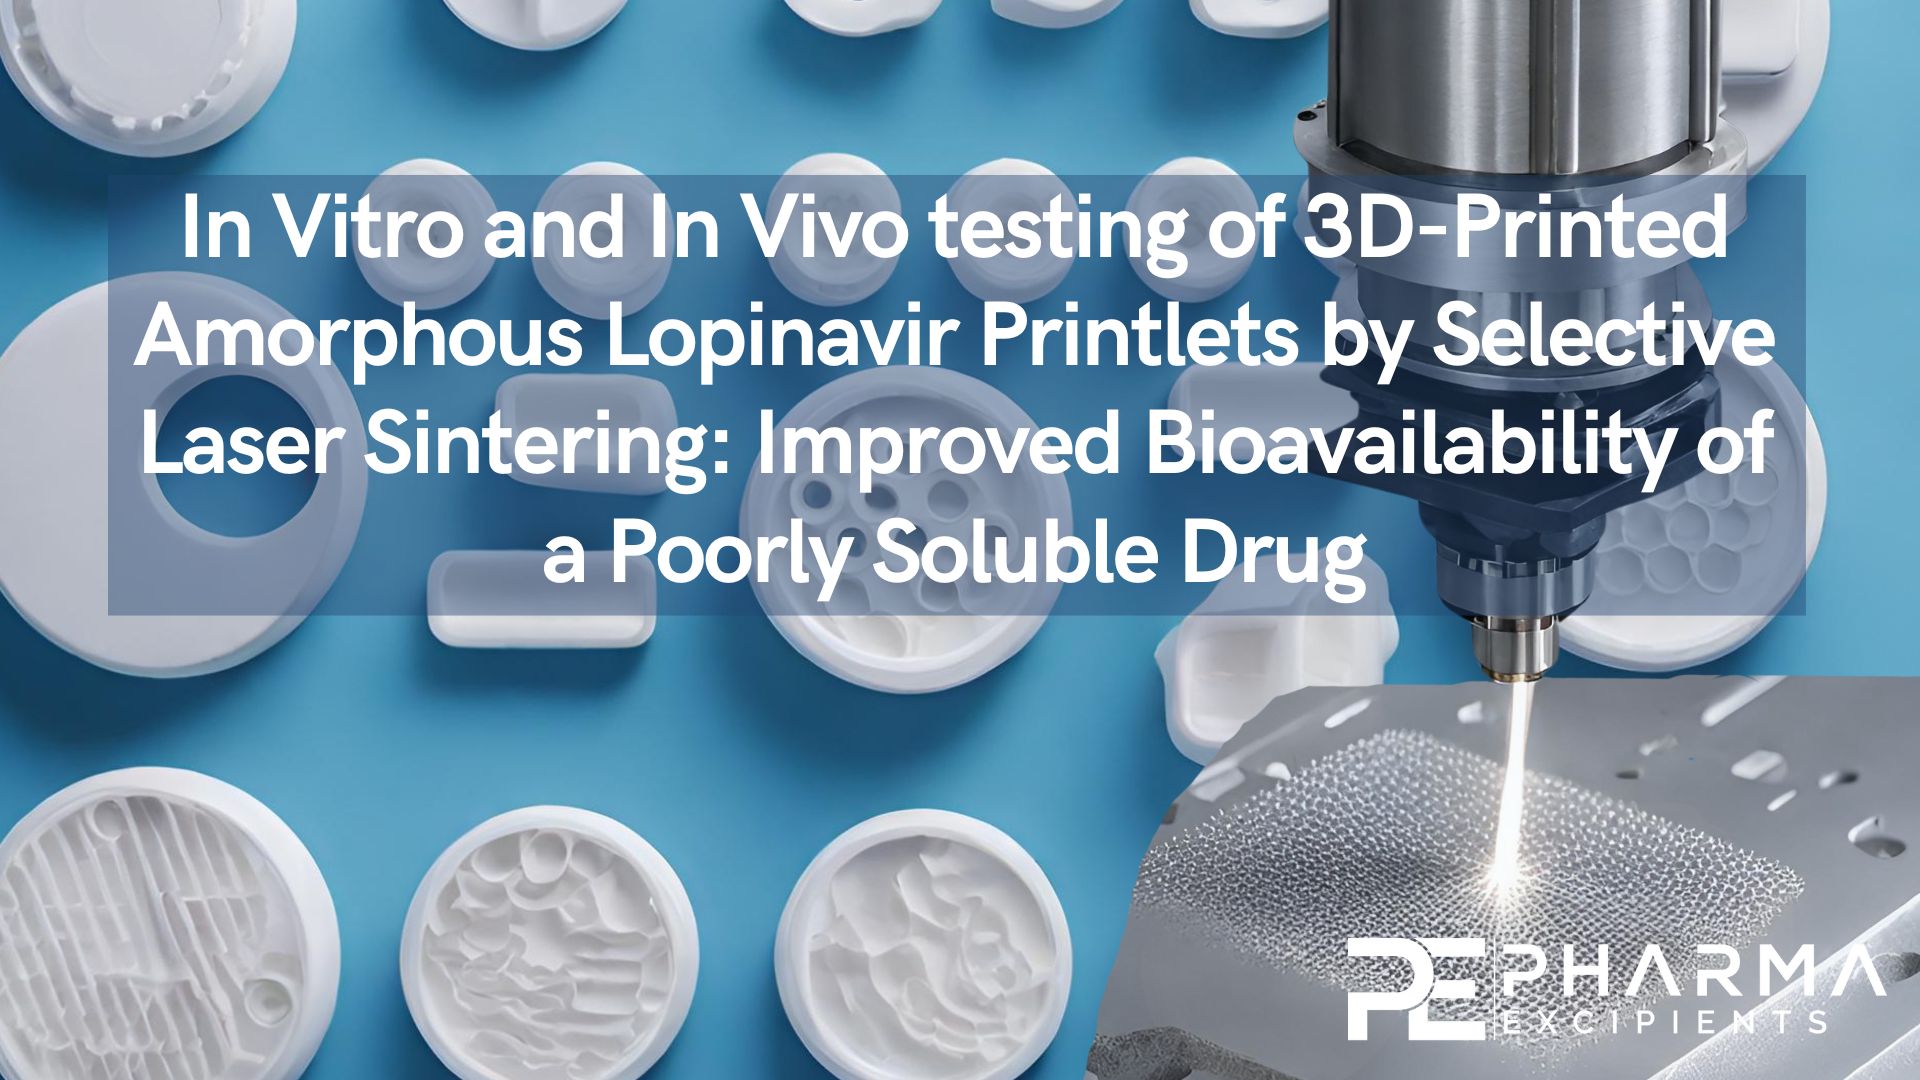 In Vitro and In Vivo testing of 3D-Printed Amorphous Lopinavir Printlets by Selective Laser Sinitering Improved Bioavailability of a Poorly Soluble Drug